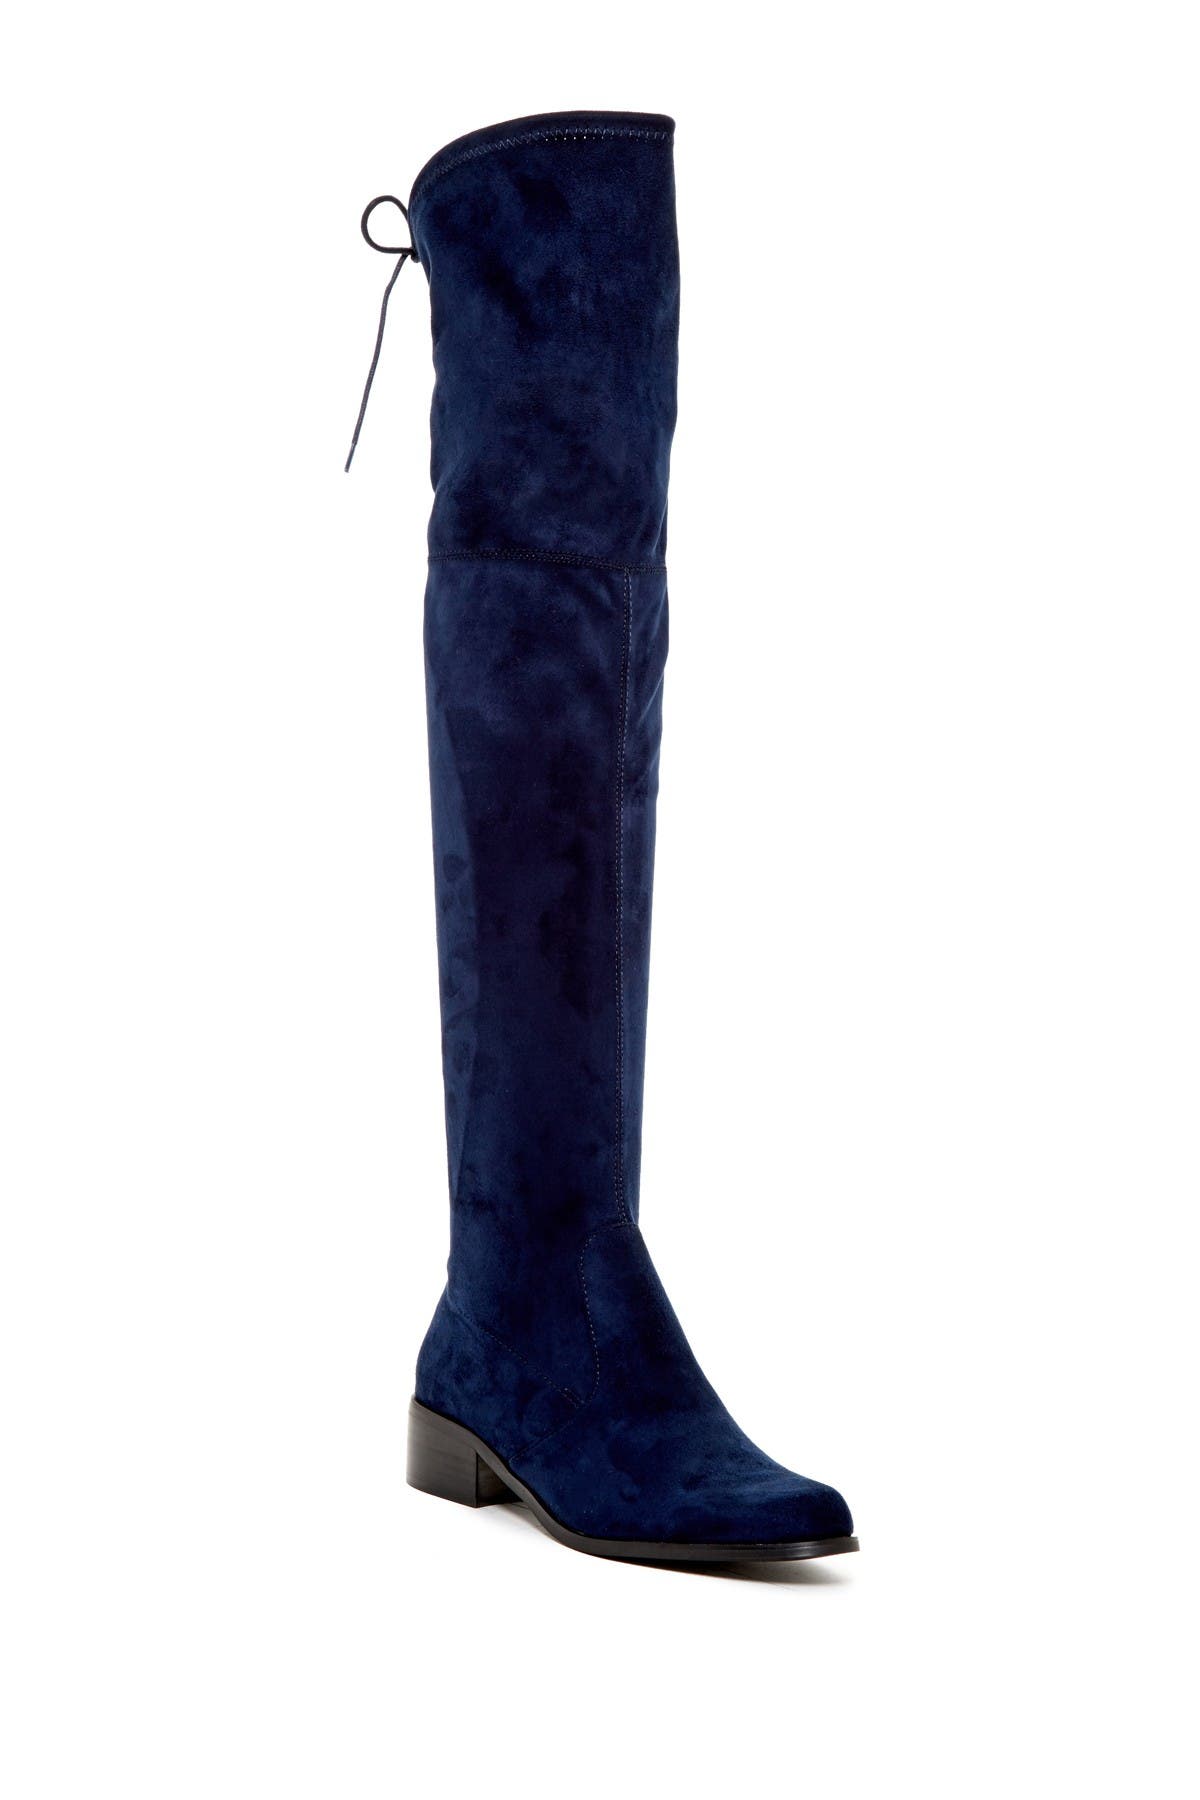 charles by charles david gunter wide calf over the knee boot